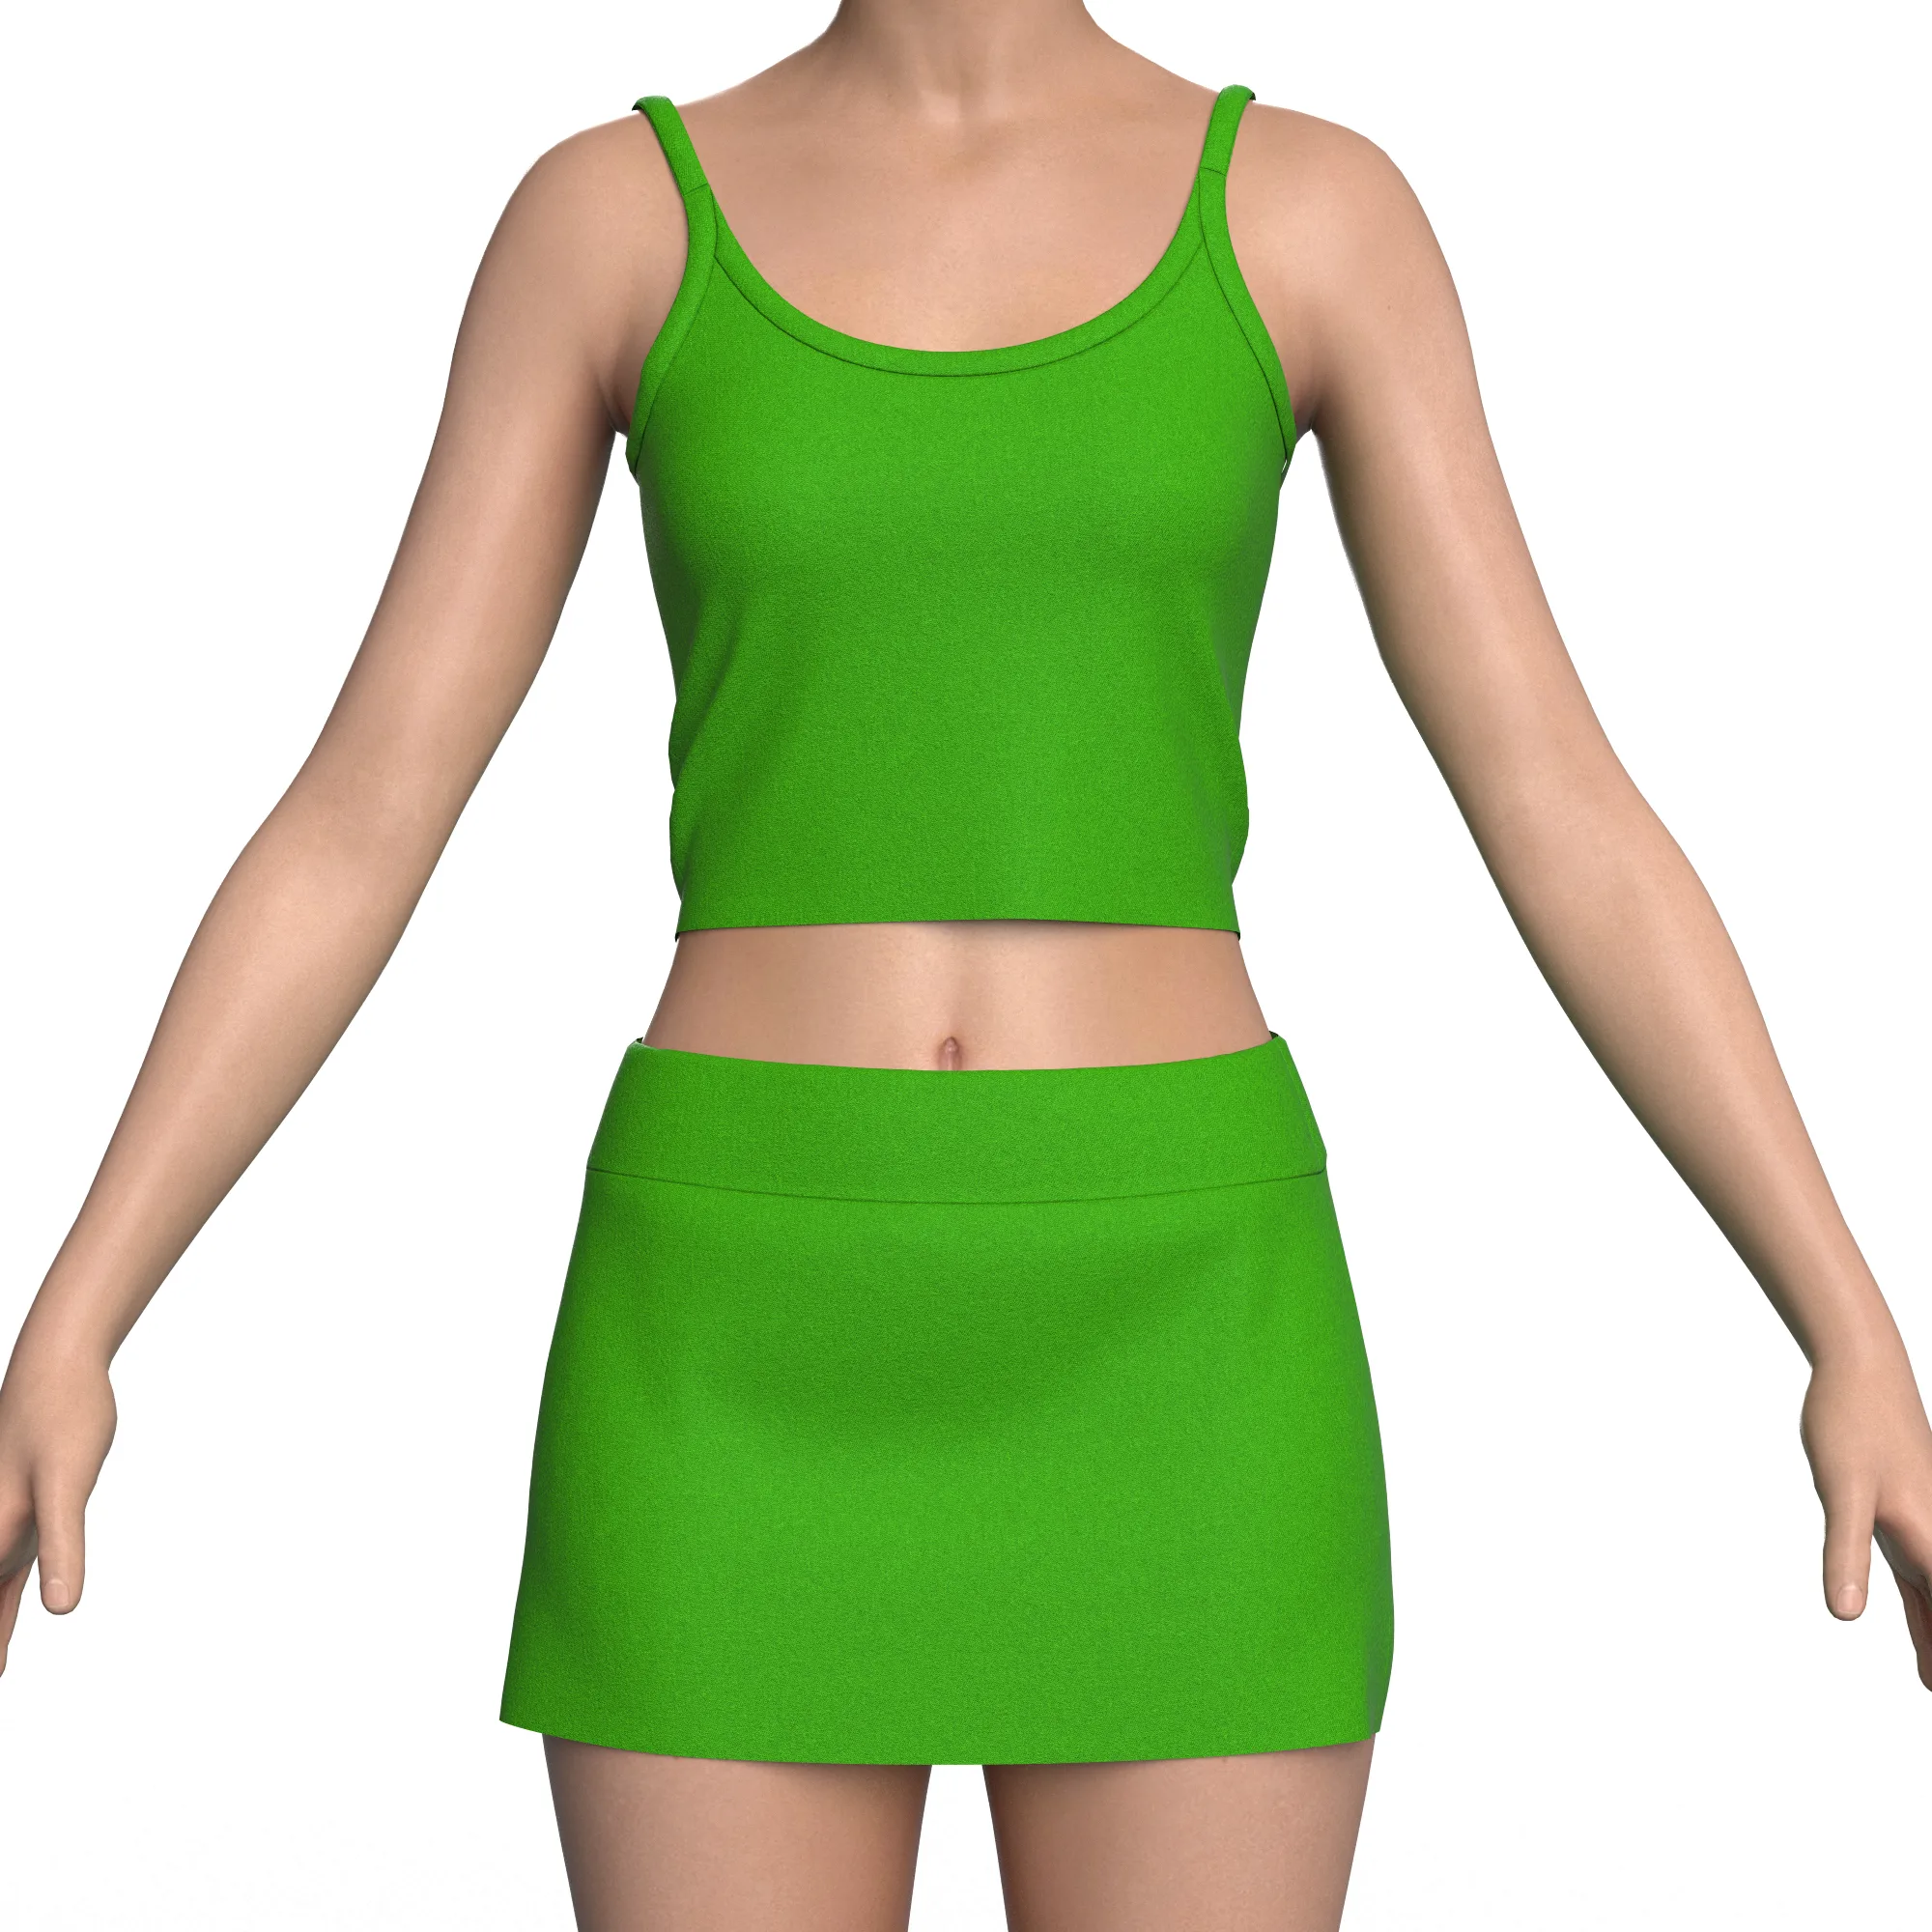 Green top and skirt